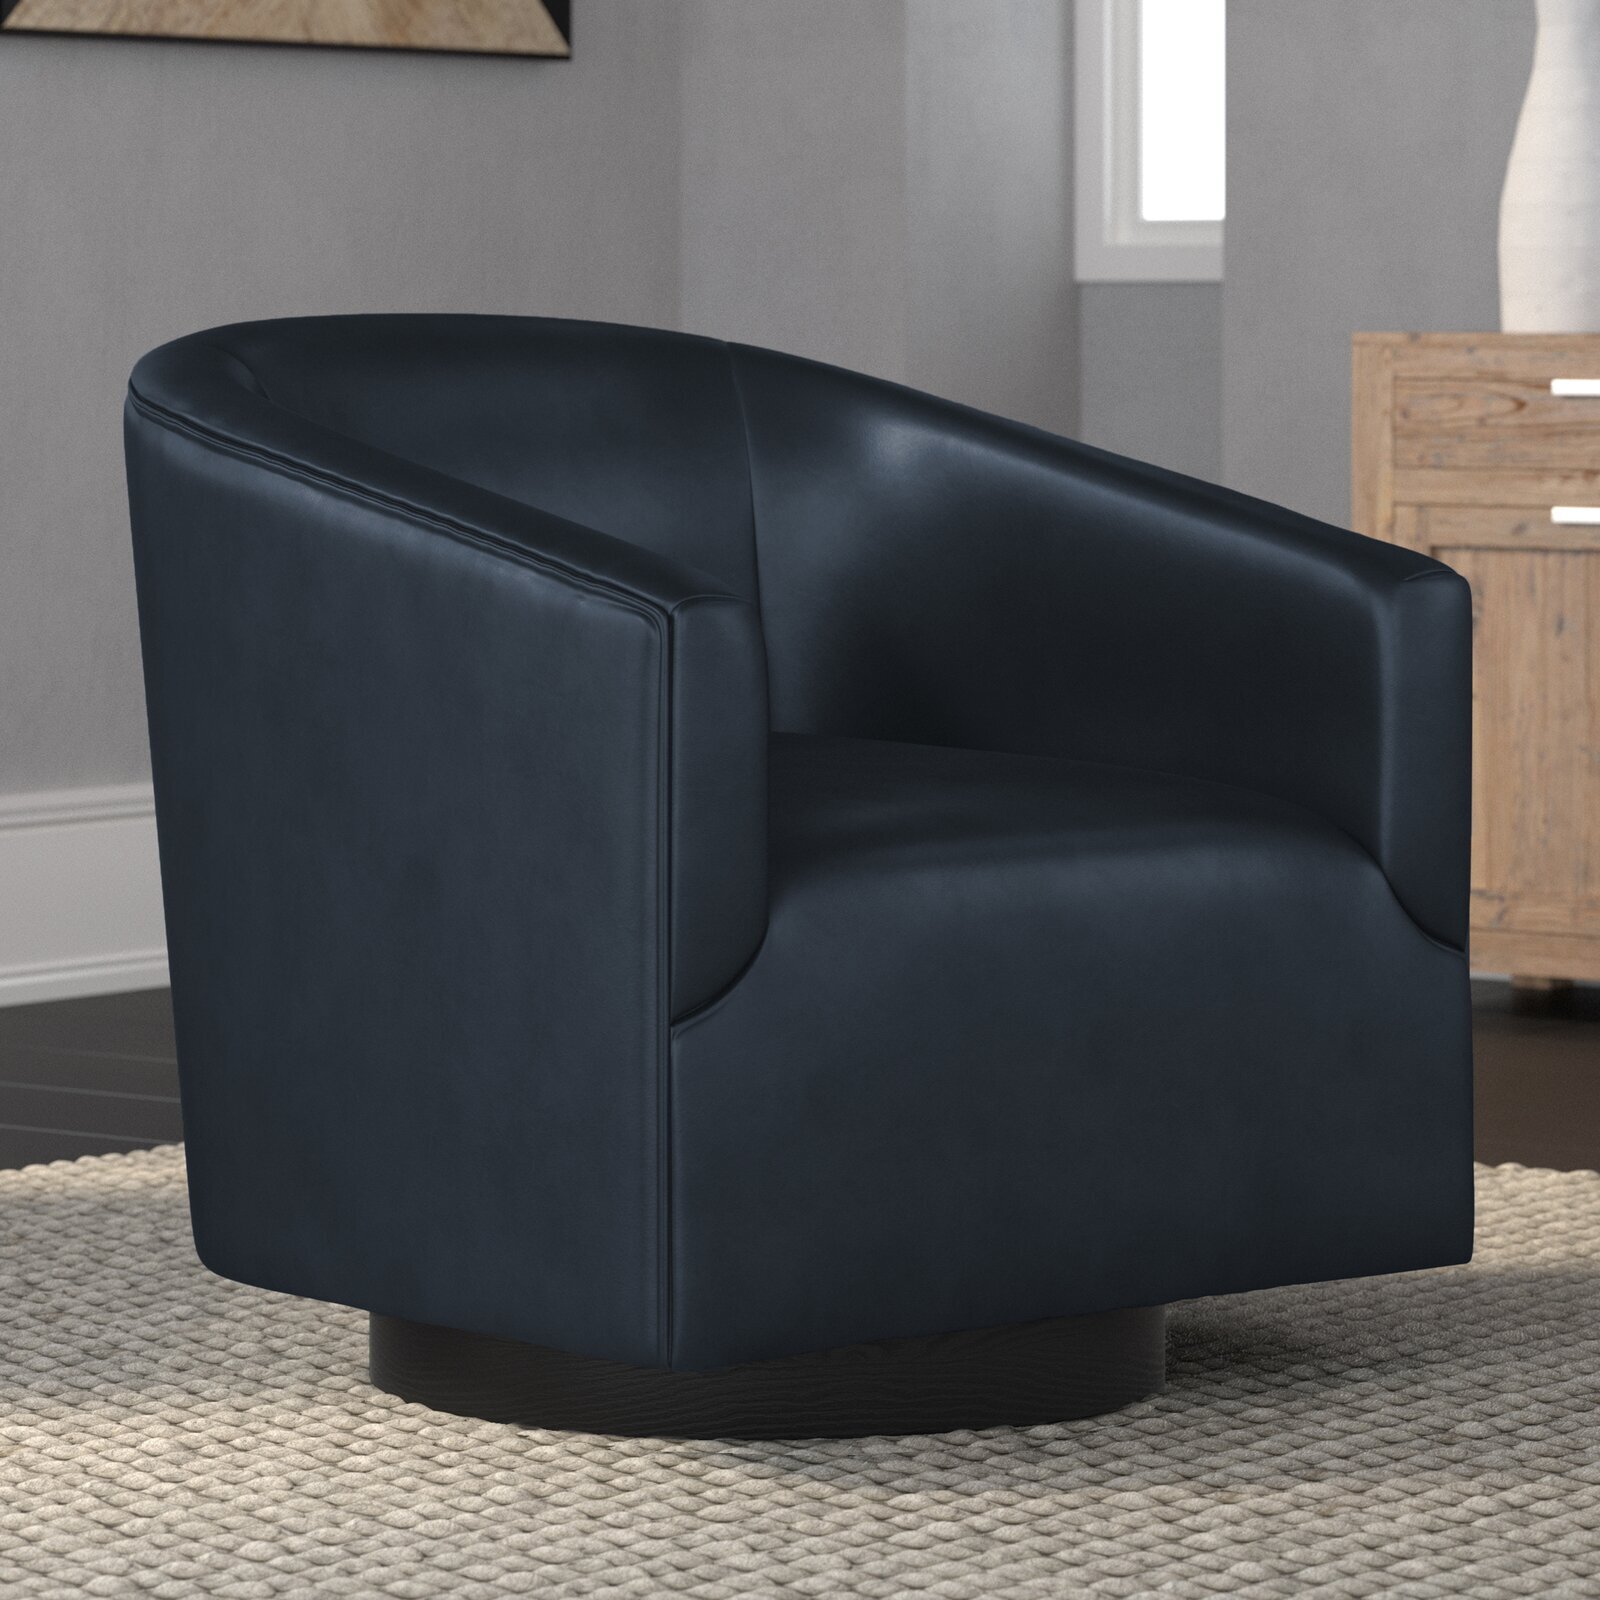 A sleek leather oversized round chair